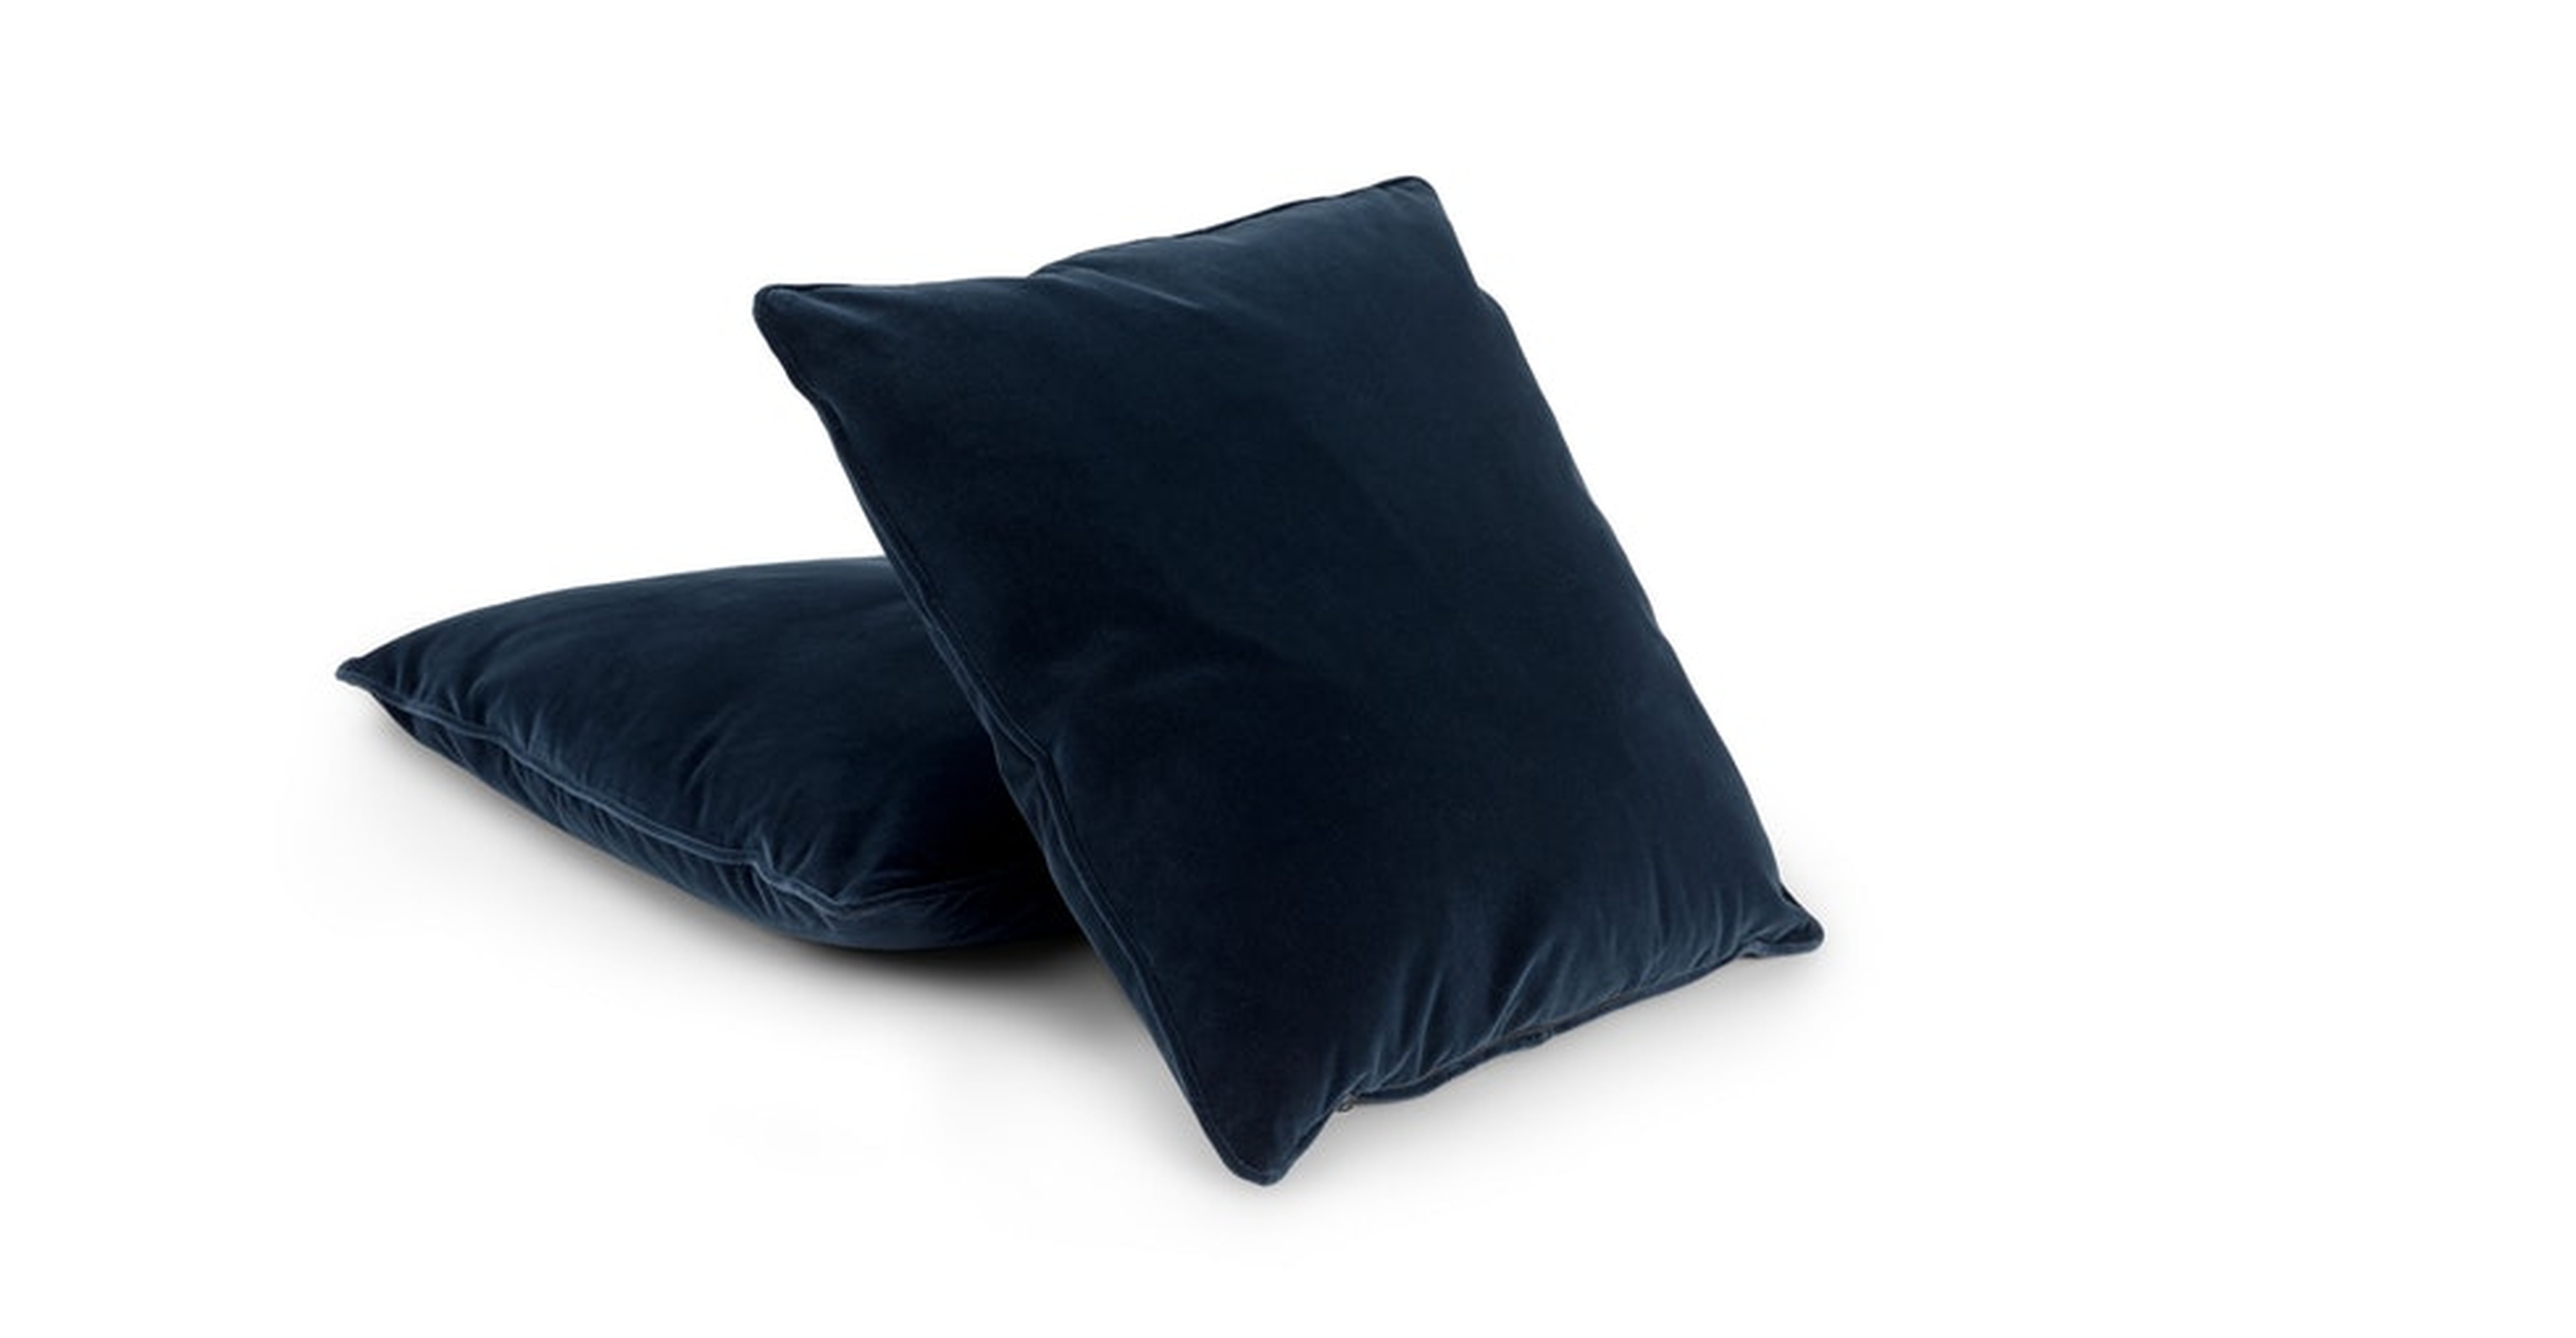 Lucca Pillow, 20" x 20", Cascadia Blue, Set of 2 RESTOCK Mid October 2022 - Article